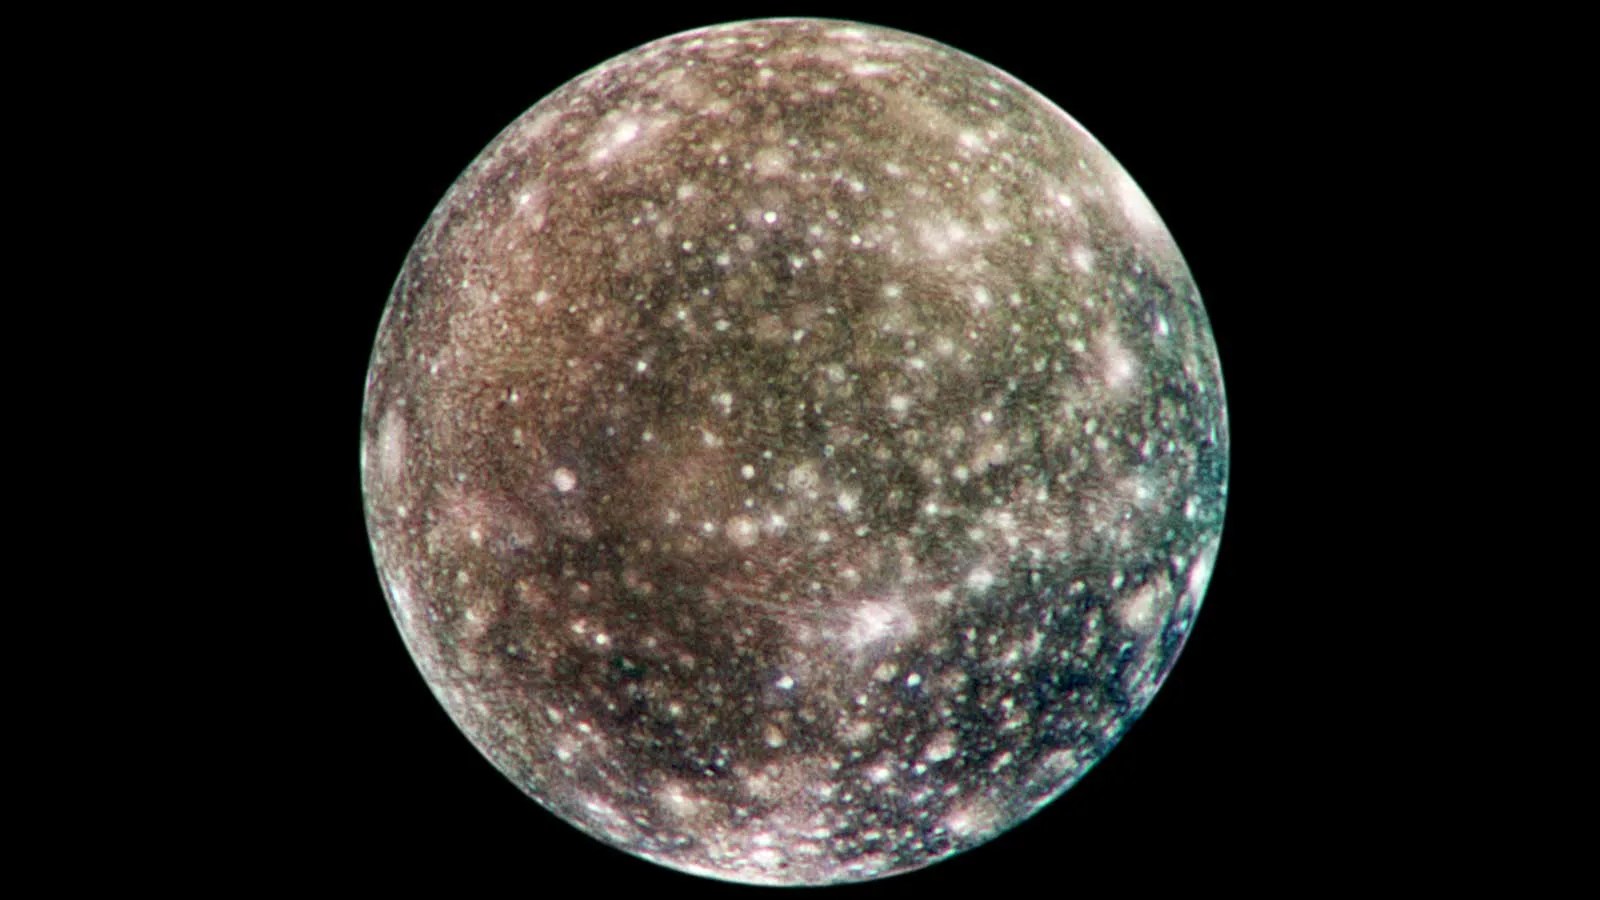 Jupiter's moon Callisto appears in space, pockmarked by many bright craters in its dark, brown surface.